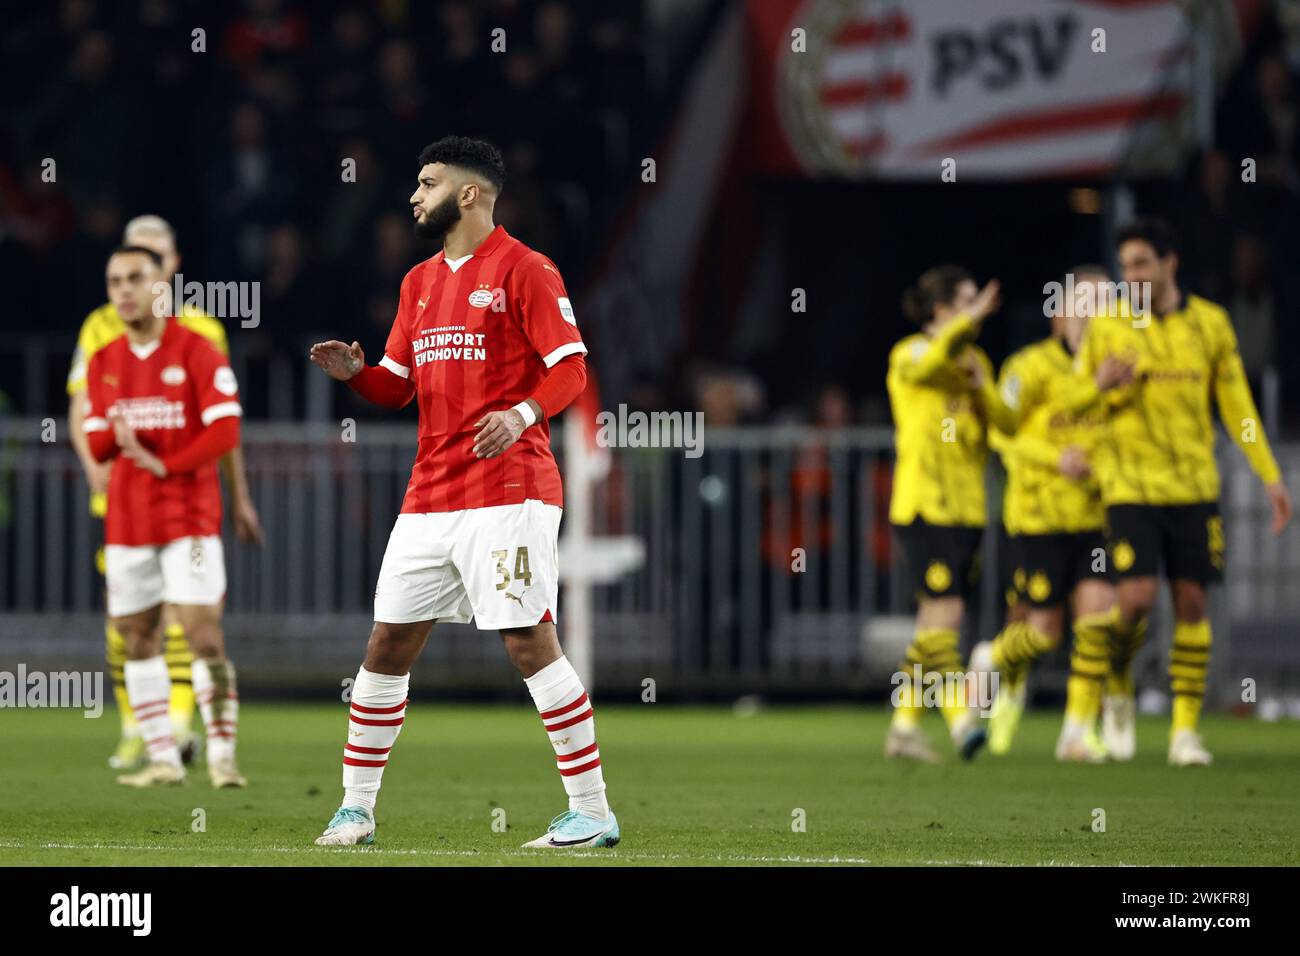 EINDHOVEN - Ismael Saibari of PSV Eindhoven disappointment after the 0-1 draw during the UEFA Champions League eighth final match between PSV Eindhoven and Borussia Dortmund at the Phillips stadium on February 20, 2024 in Eindhoven, Netherlands. ANP MAURICE VAN STEEN Stock Photo